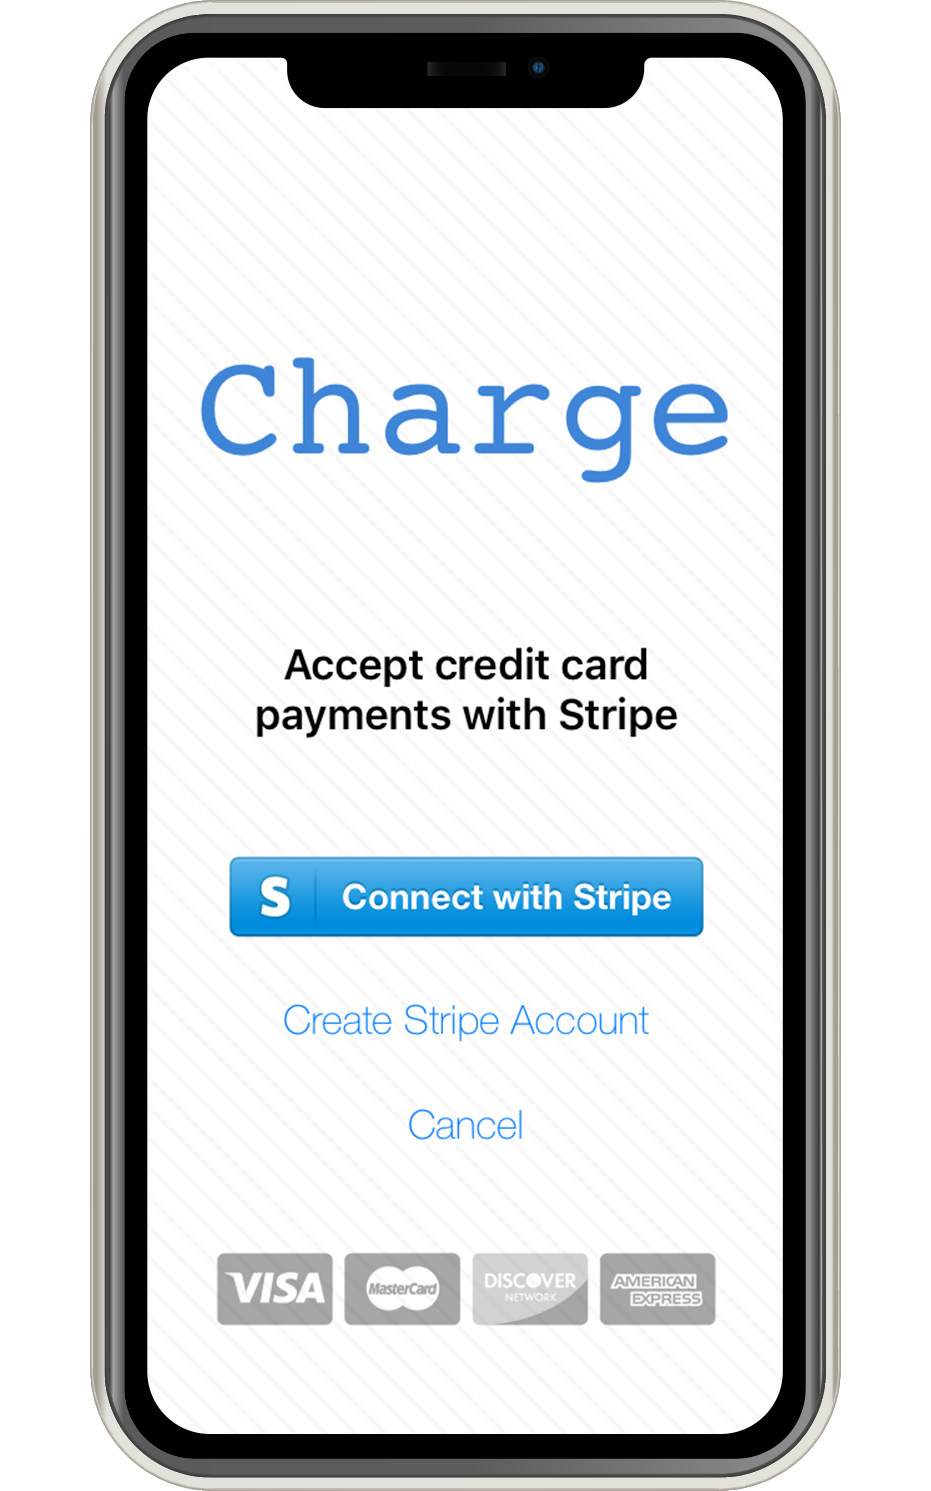 ChargeStripe is a mobile payment app that works with Stripe